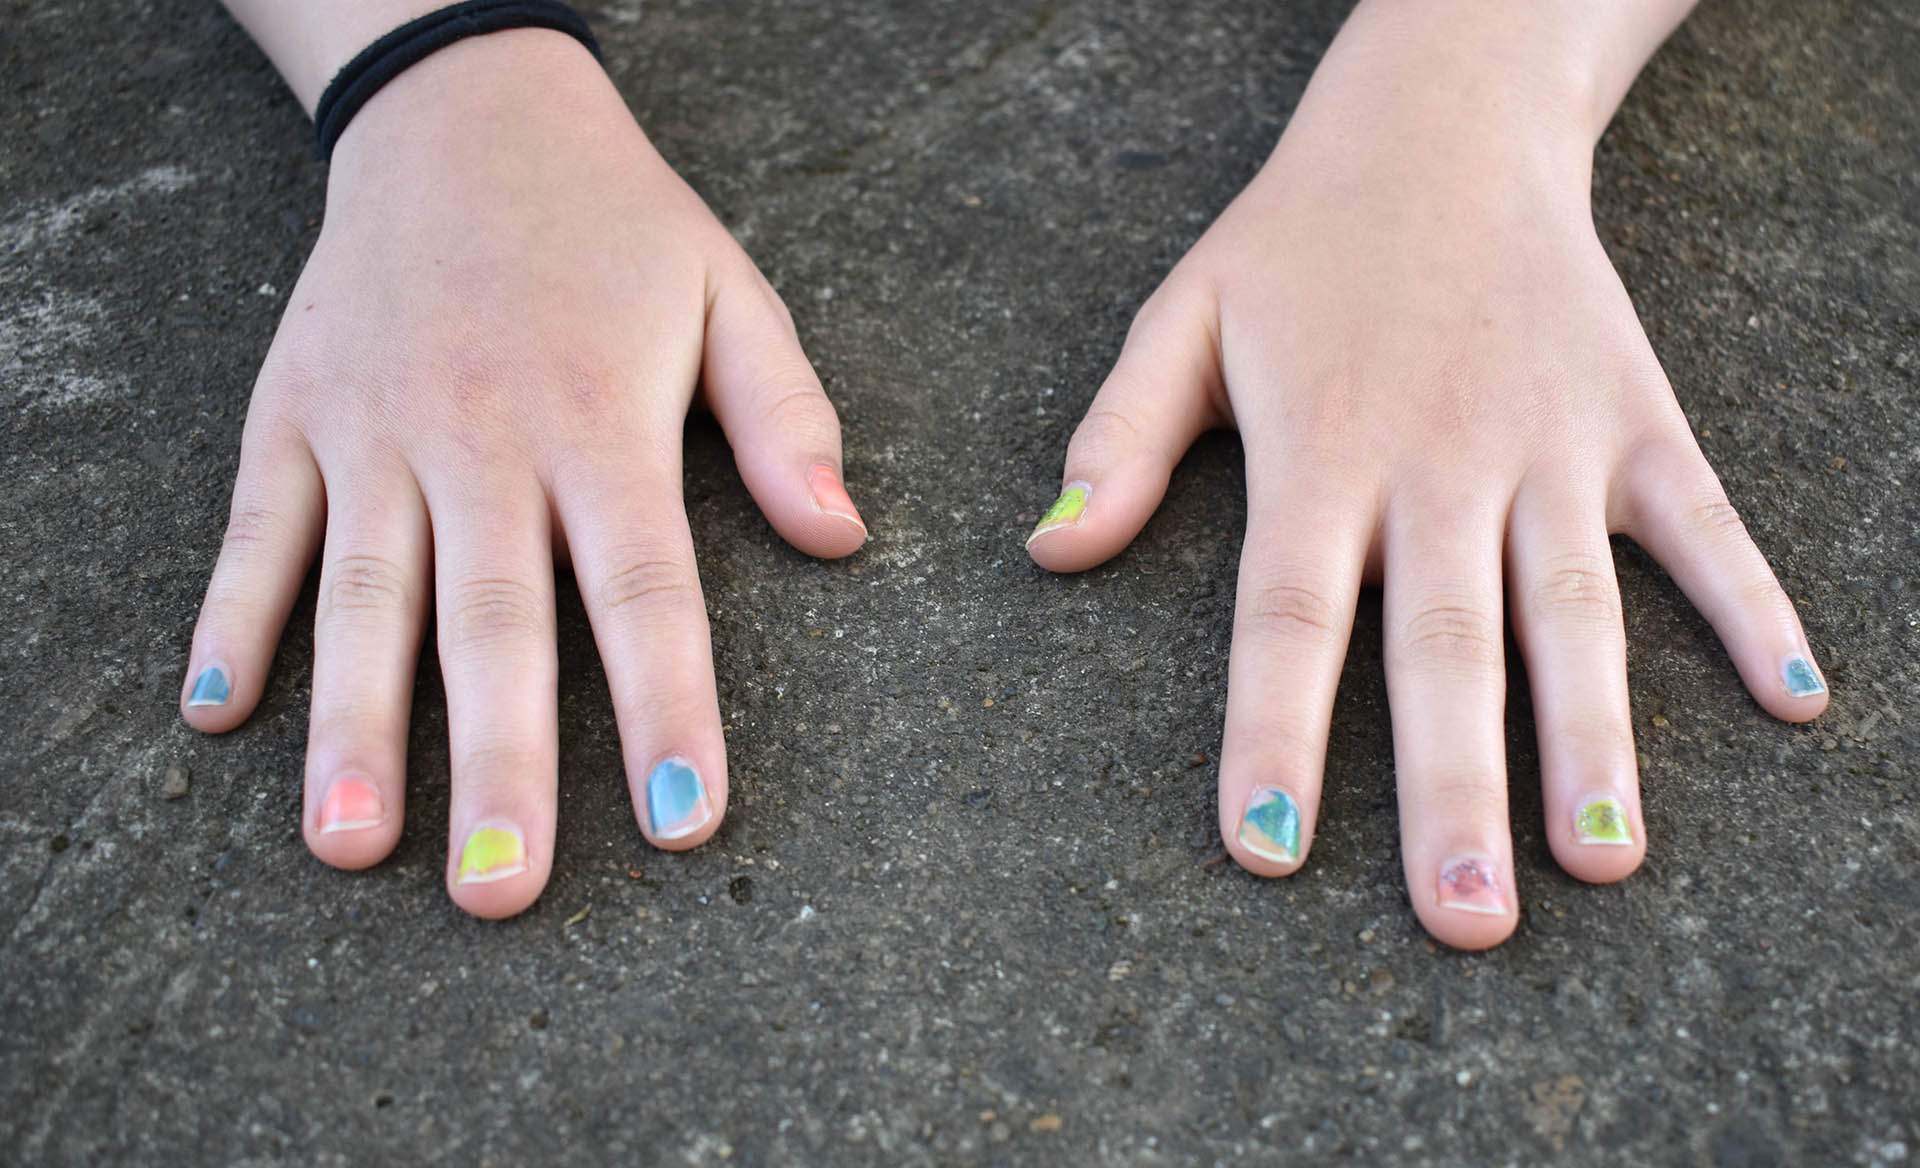 Two hands rest on a concrete table, featuring multi-colored nails and hairbands around the young girl’s wrist.